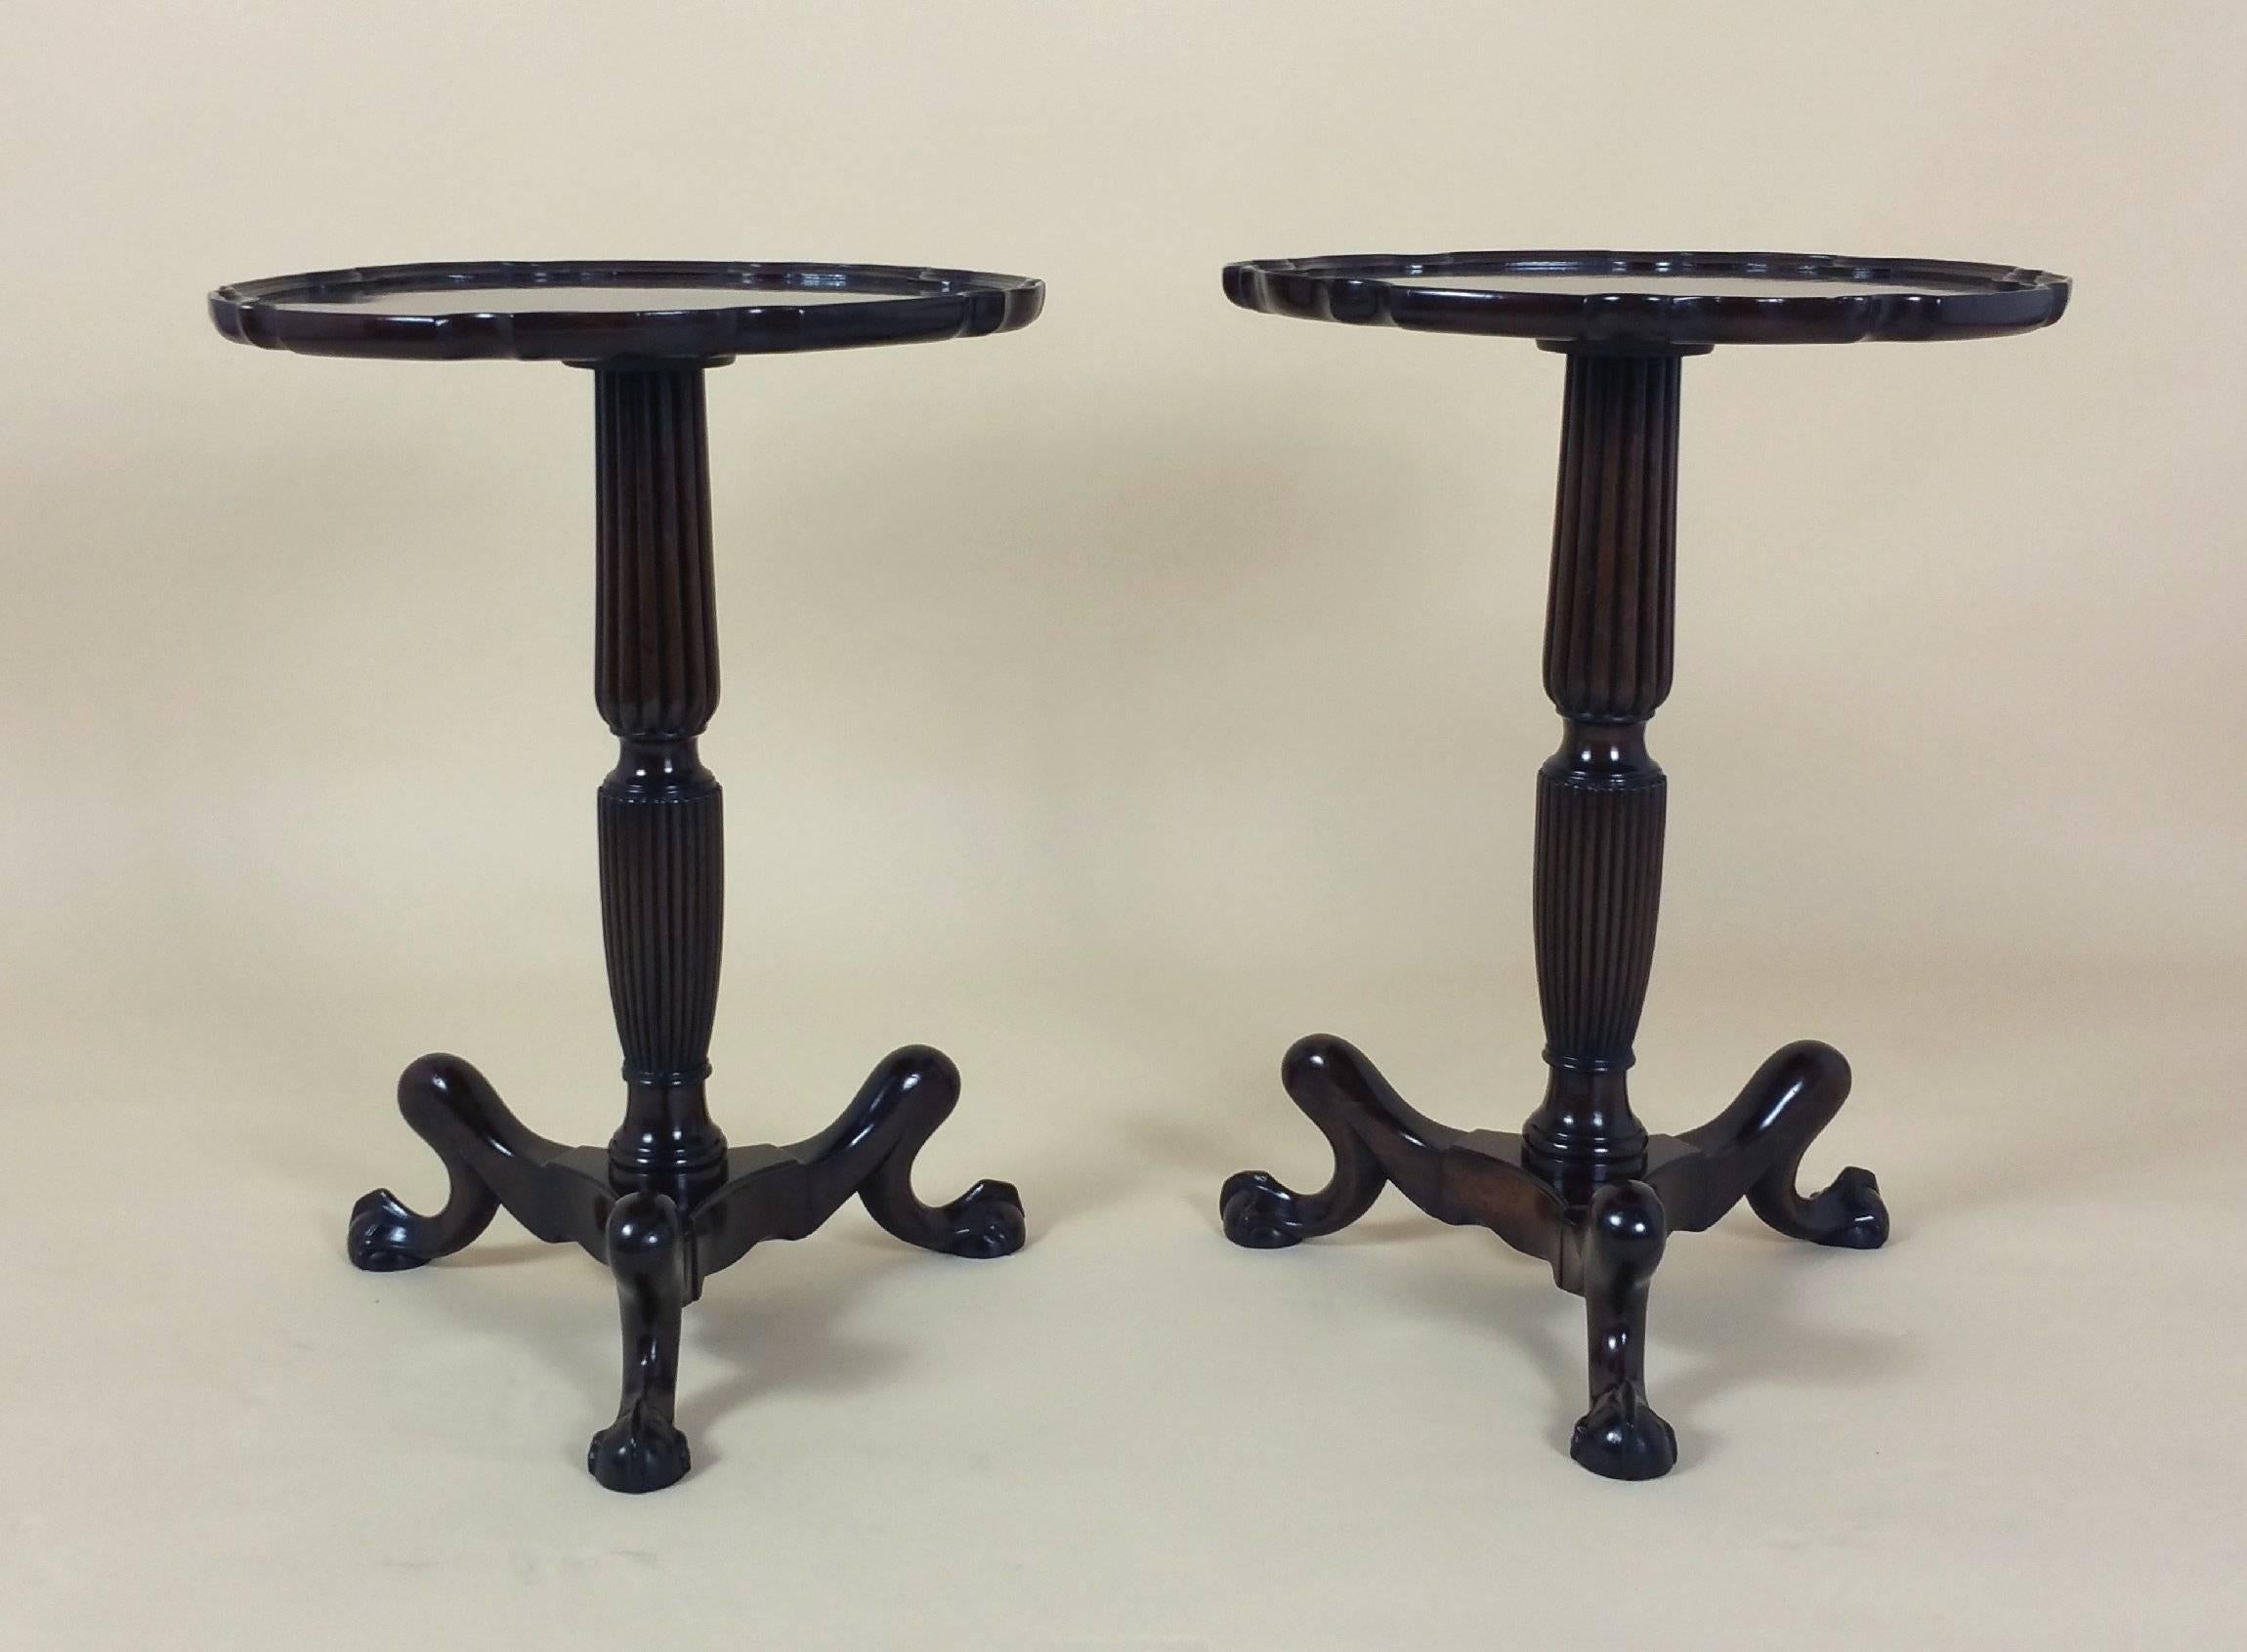 This lovely pair of Edwardian Regency style mahogany lamp tables feature a pretty pie crust edge, and are supported on a reeded stem with ball and claw feet. Each table measures 18 in – 45.7 cm in diameter and 24 in – 61 cm in height.